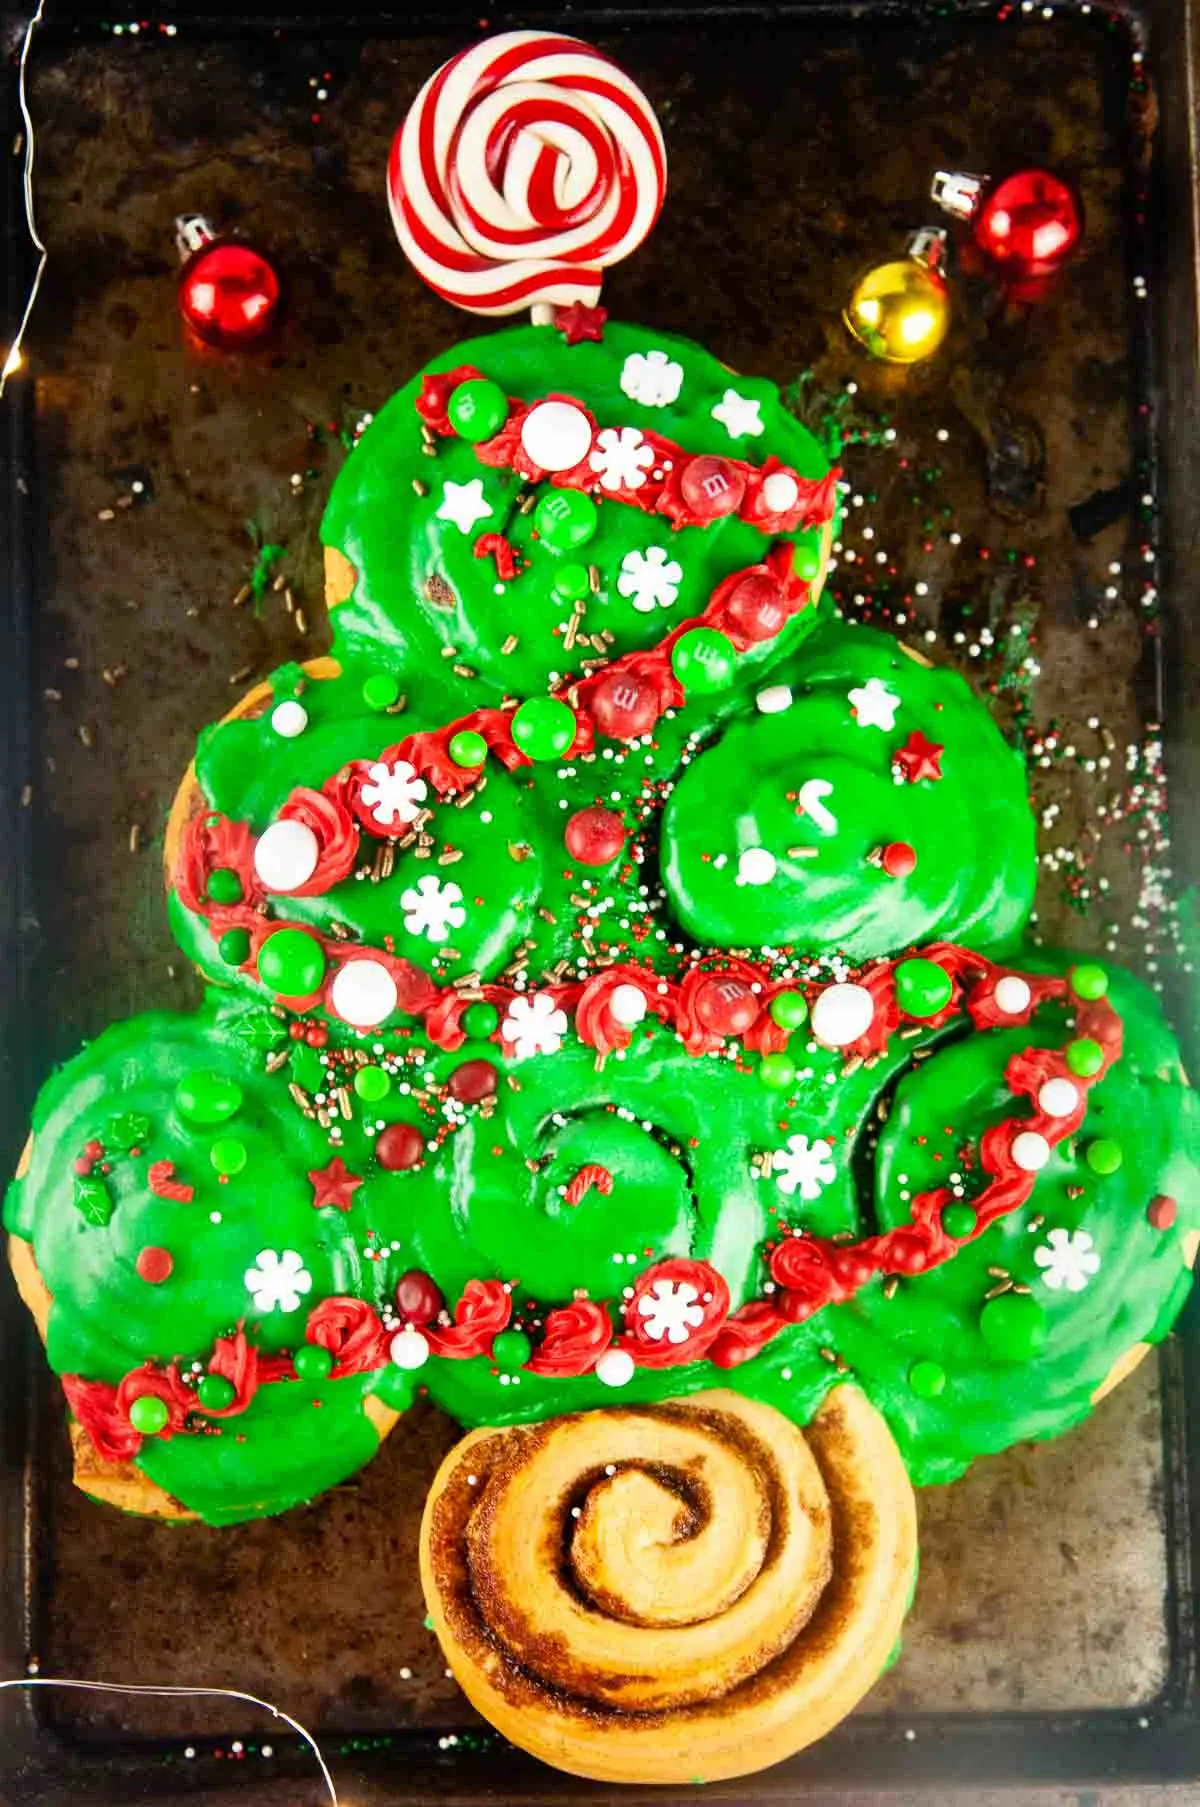 Decorated with candy, sprinkles and red frosting garland, Easy Cinnamon Roll Christmas Tree for Christmas Morning makes a fun, kid friendly Christmas breakfast.